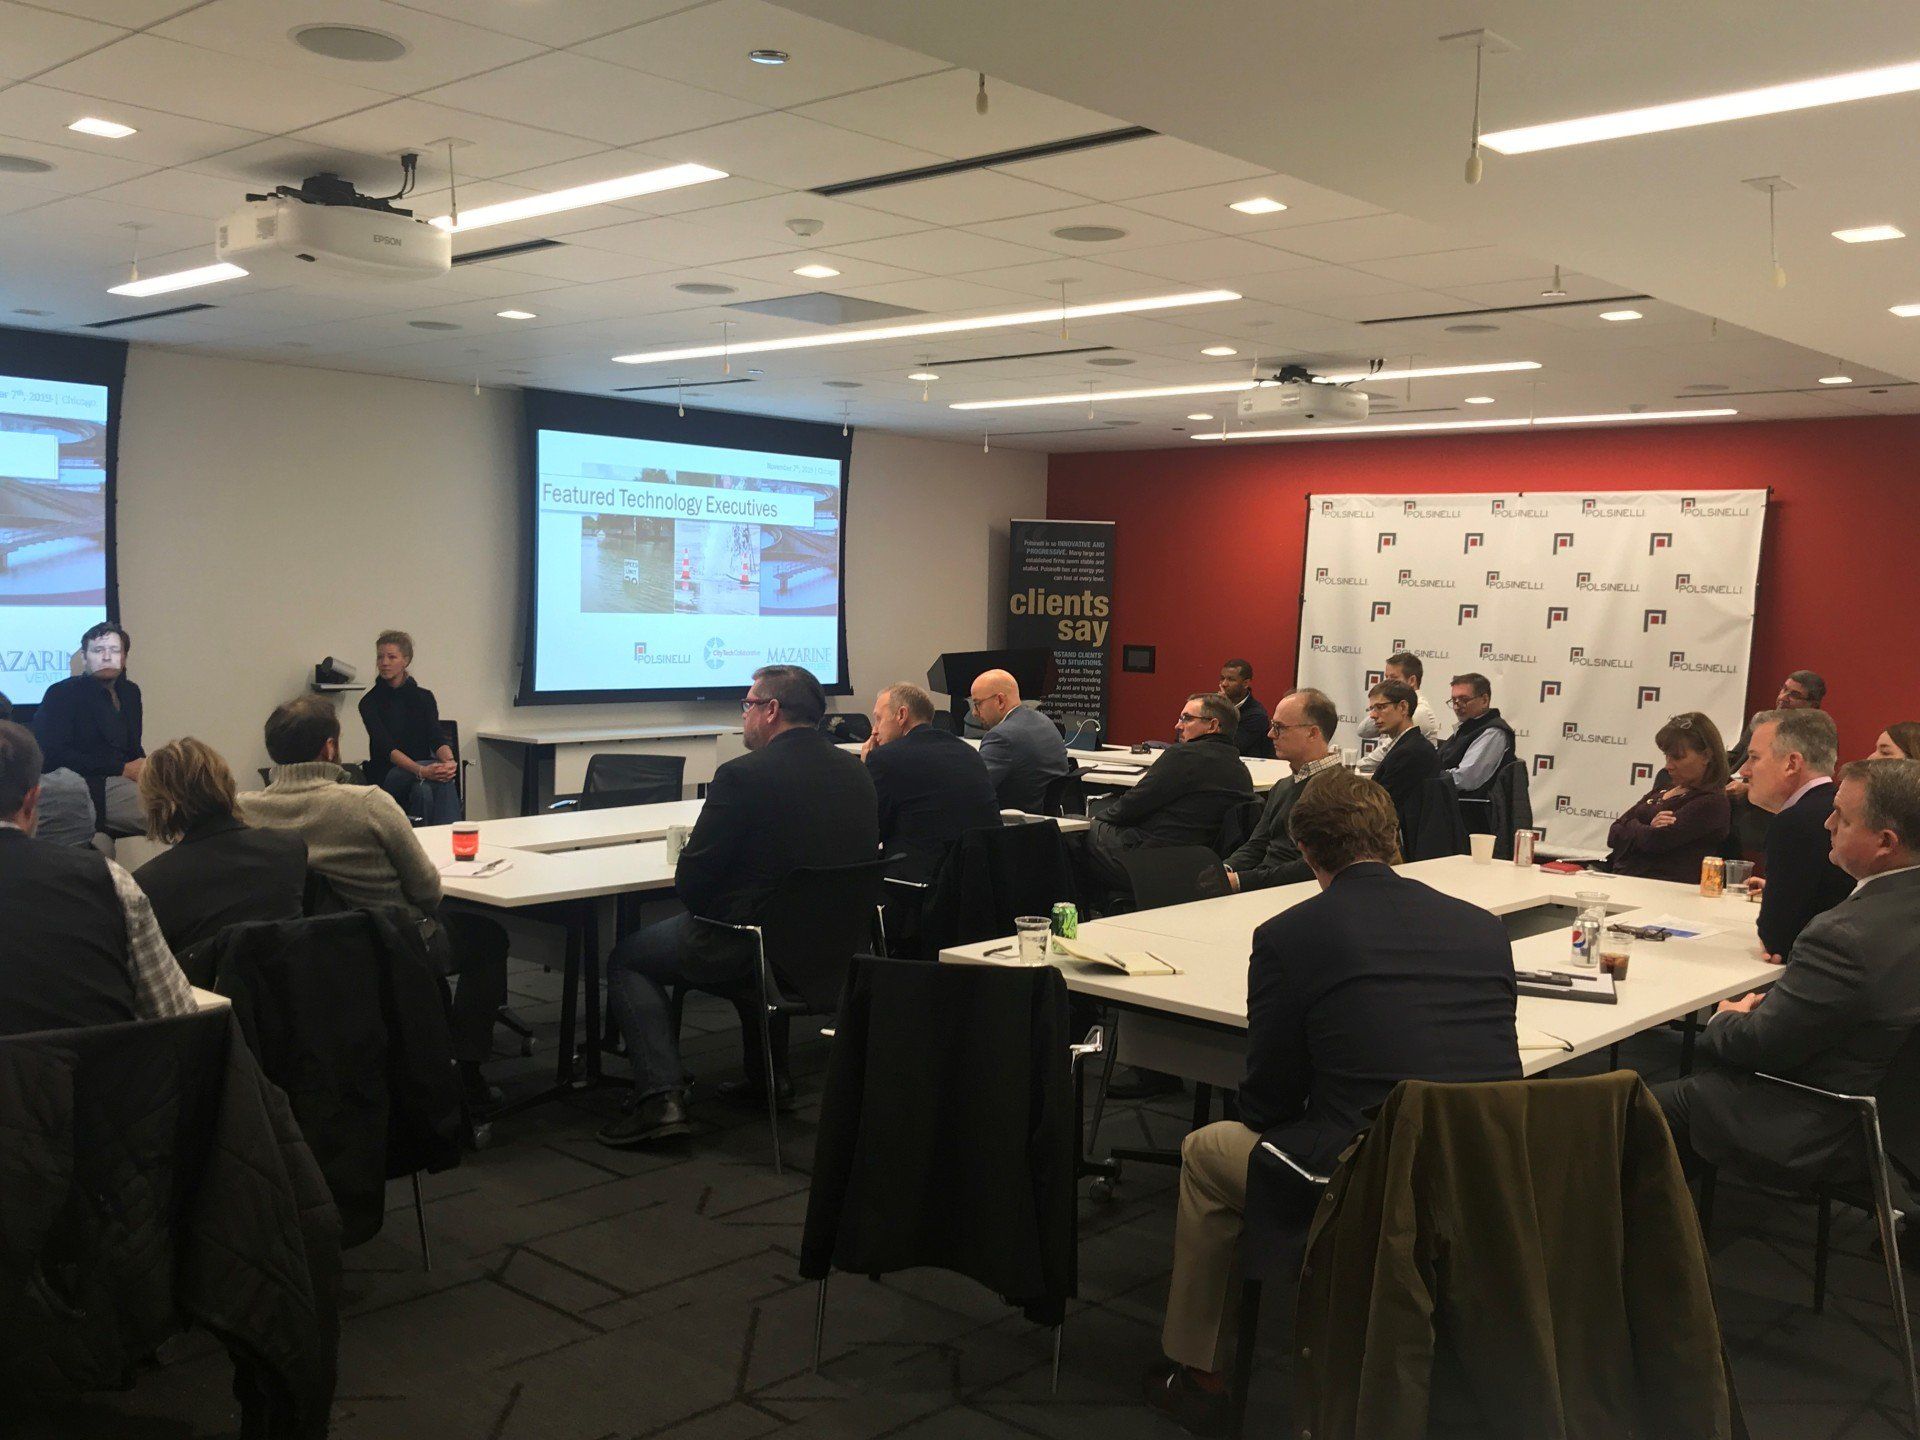 A group of technology providers, industrial analytics leaders, and policy advisers discuss remote monitoring of wastewater systems.